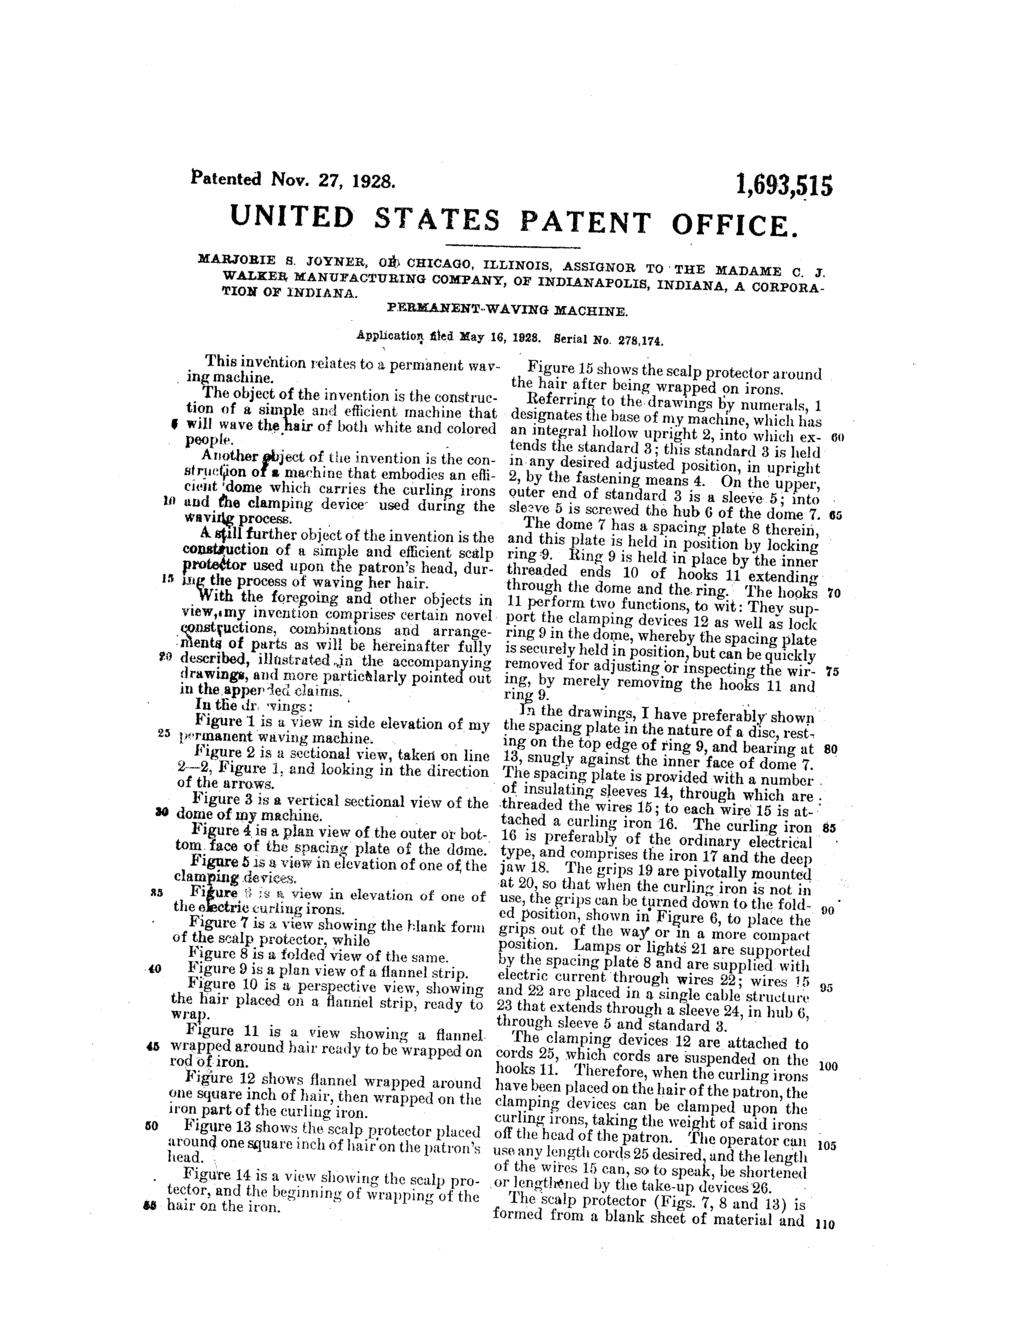 I v Patented Nov. 27, 1928. UNITED STATES PATENT OFFICE. MARJORIE S. JOYNER, Oil) CHICAGO, ILLINOIS, ASSIGNOR TO THE MADAME C..1. WALKER MANUFACTURING COMPANY, I ION OF INDIANA.